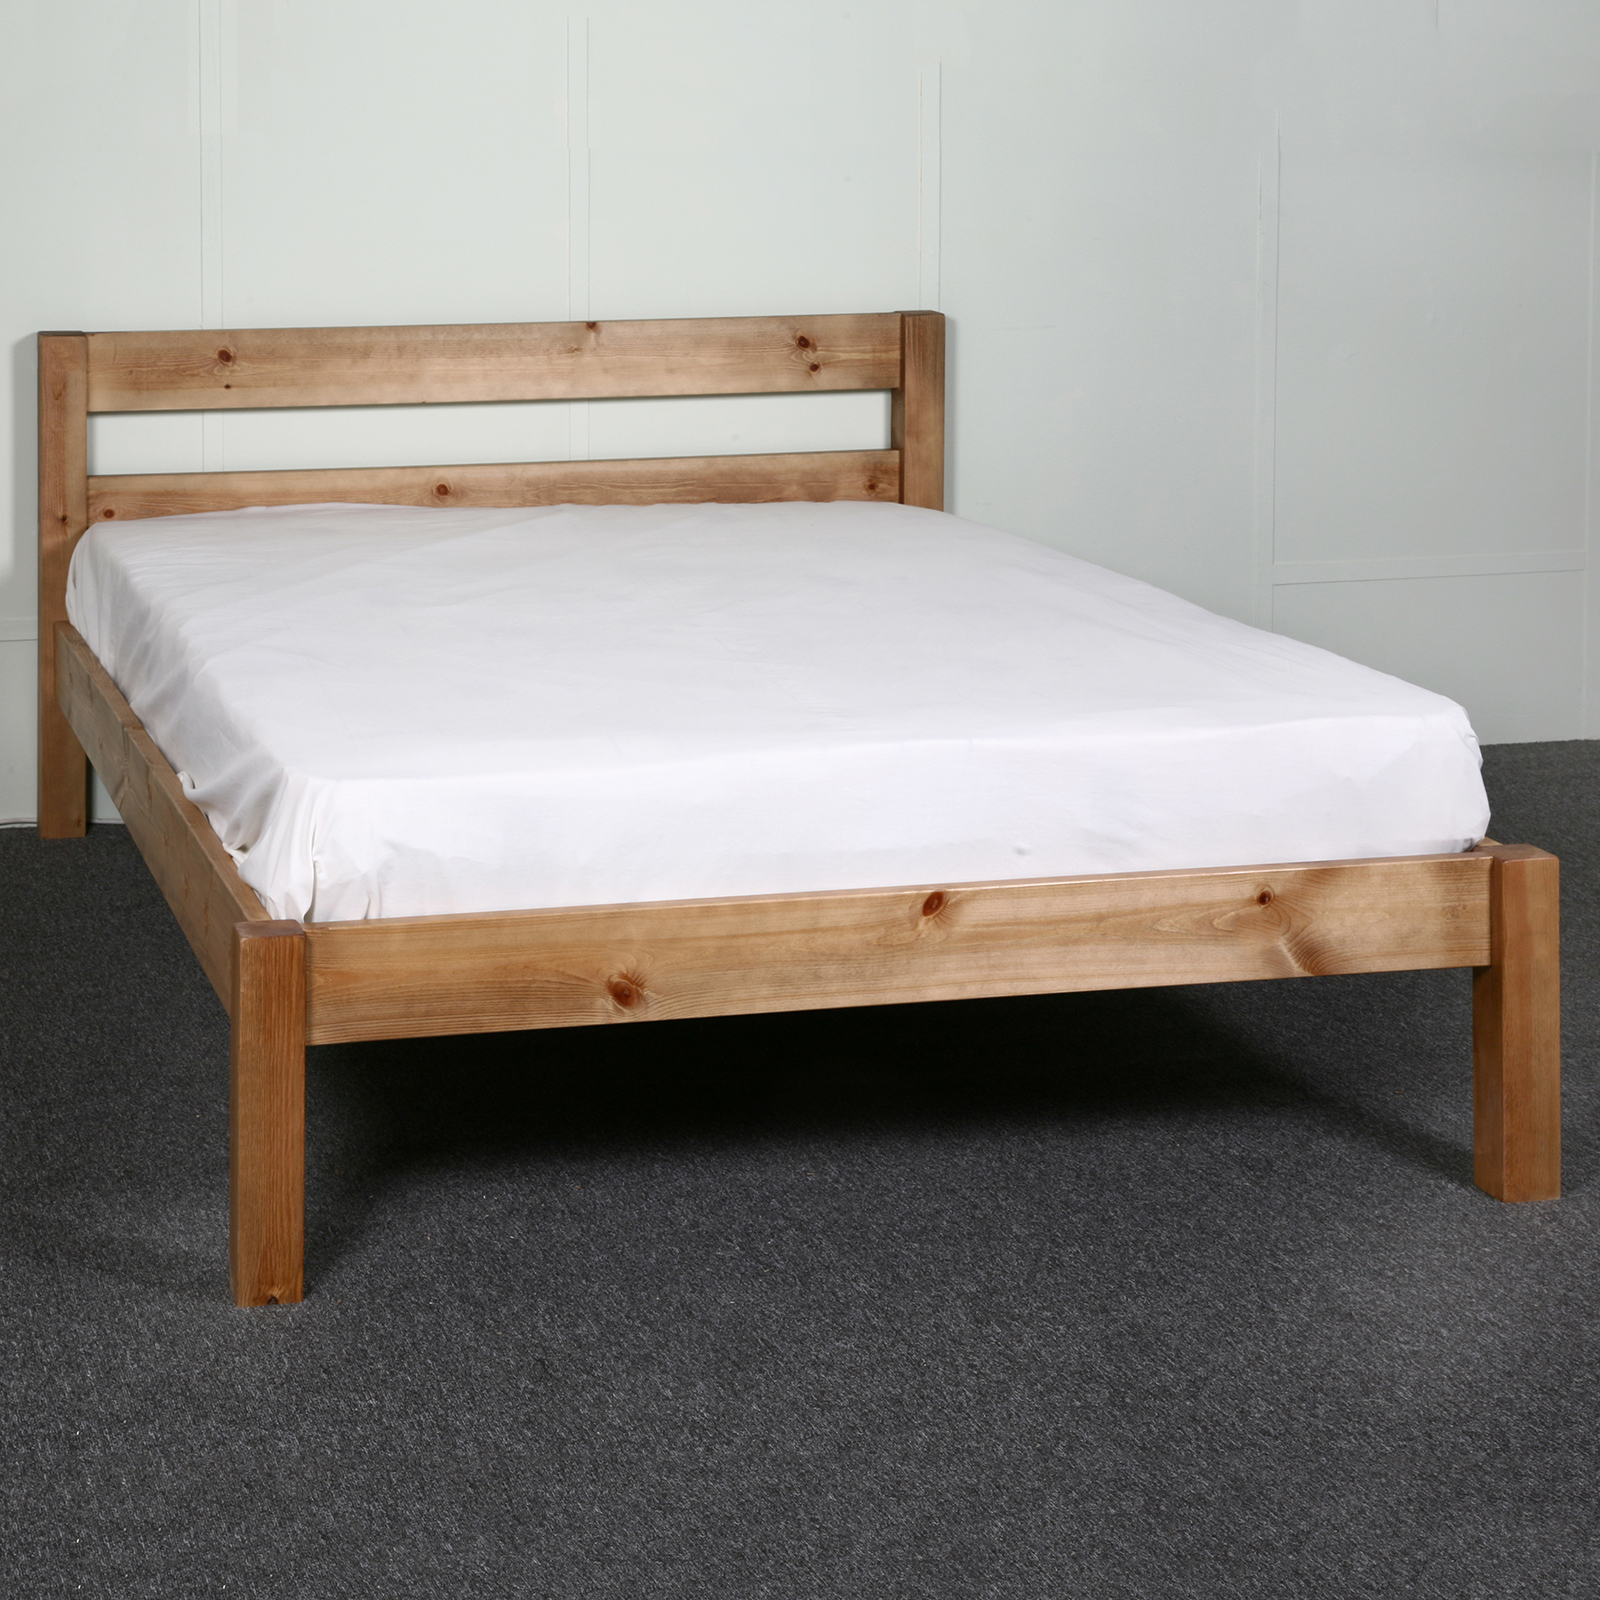 5ft Ranch Bed King Size Realwoods, King Pine Bed Frame